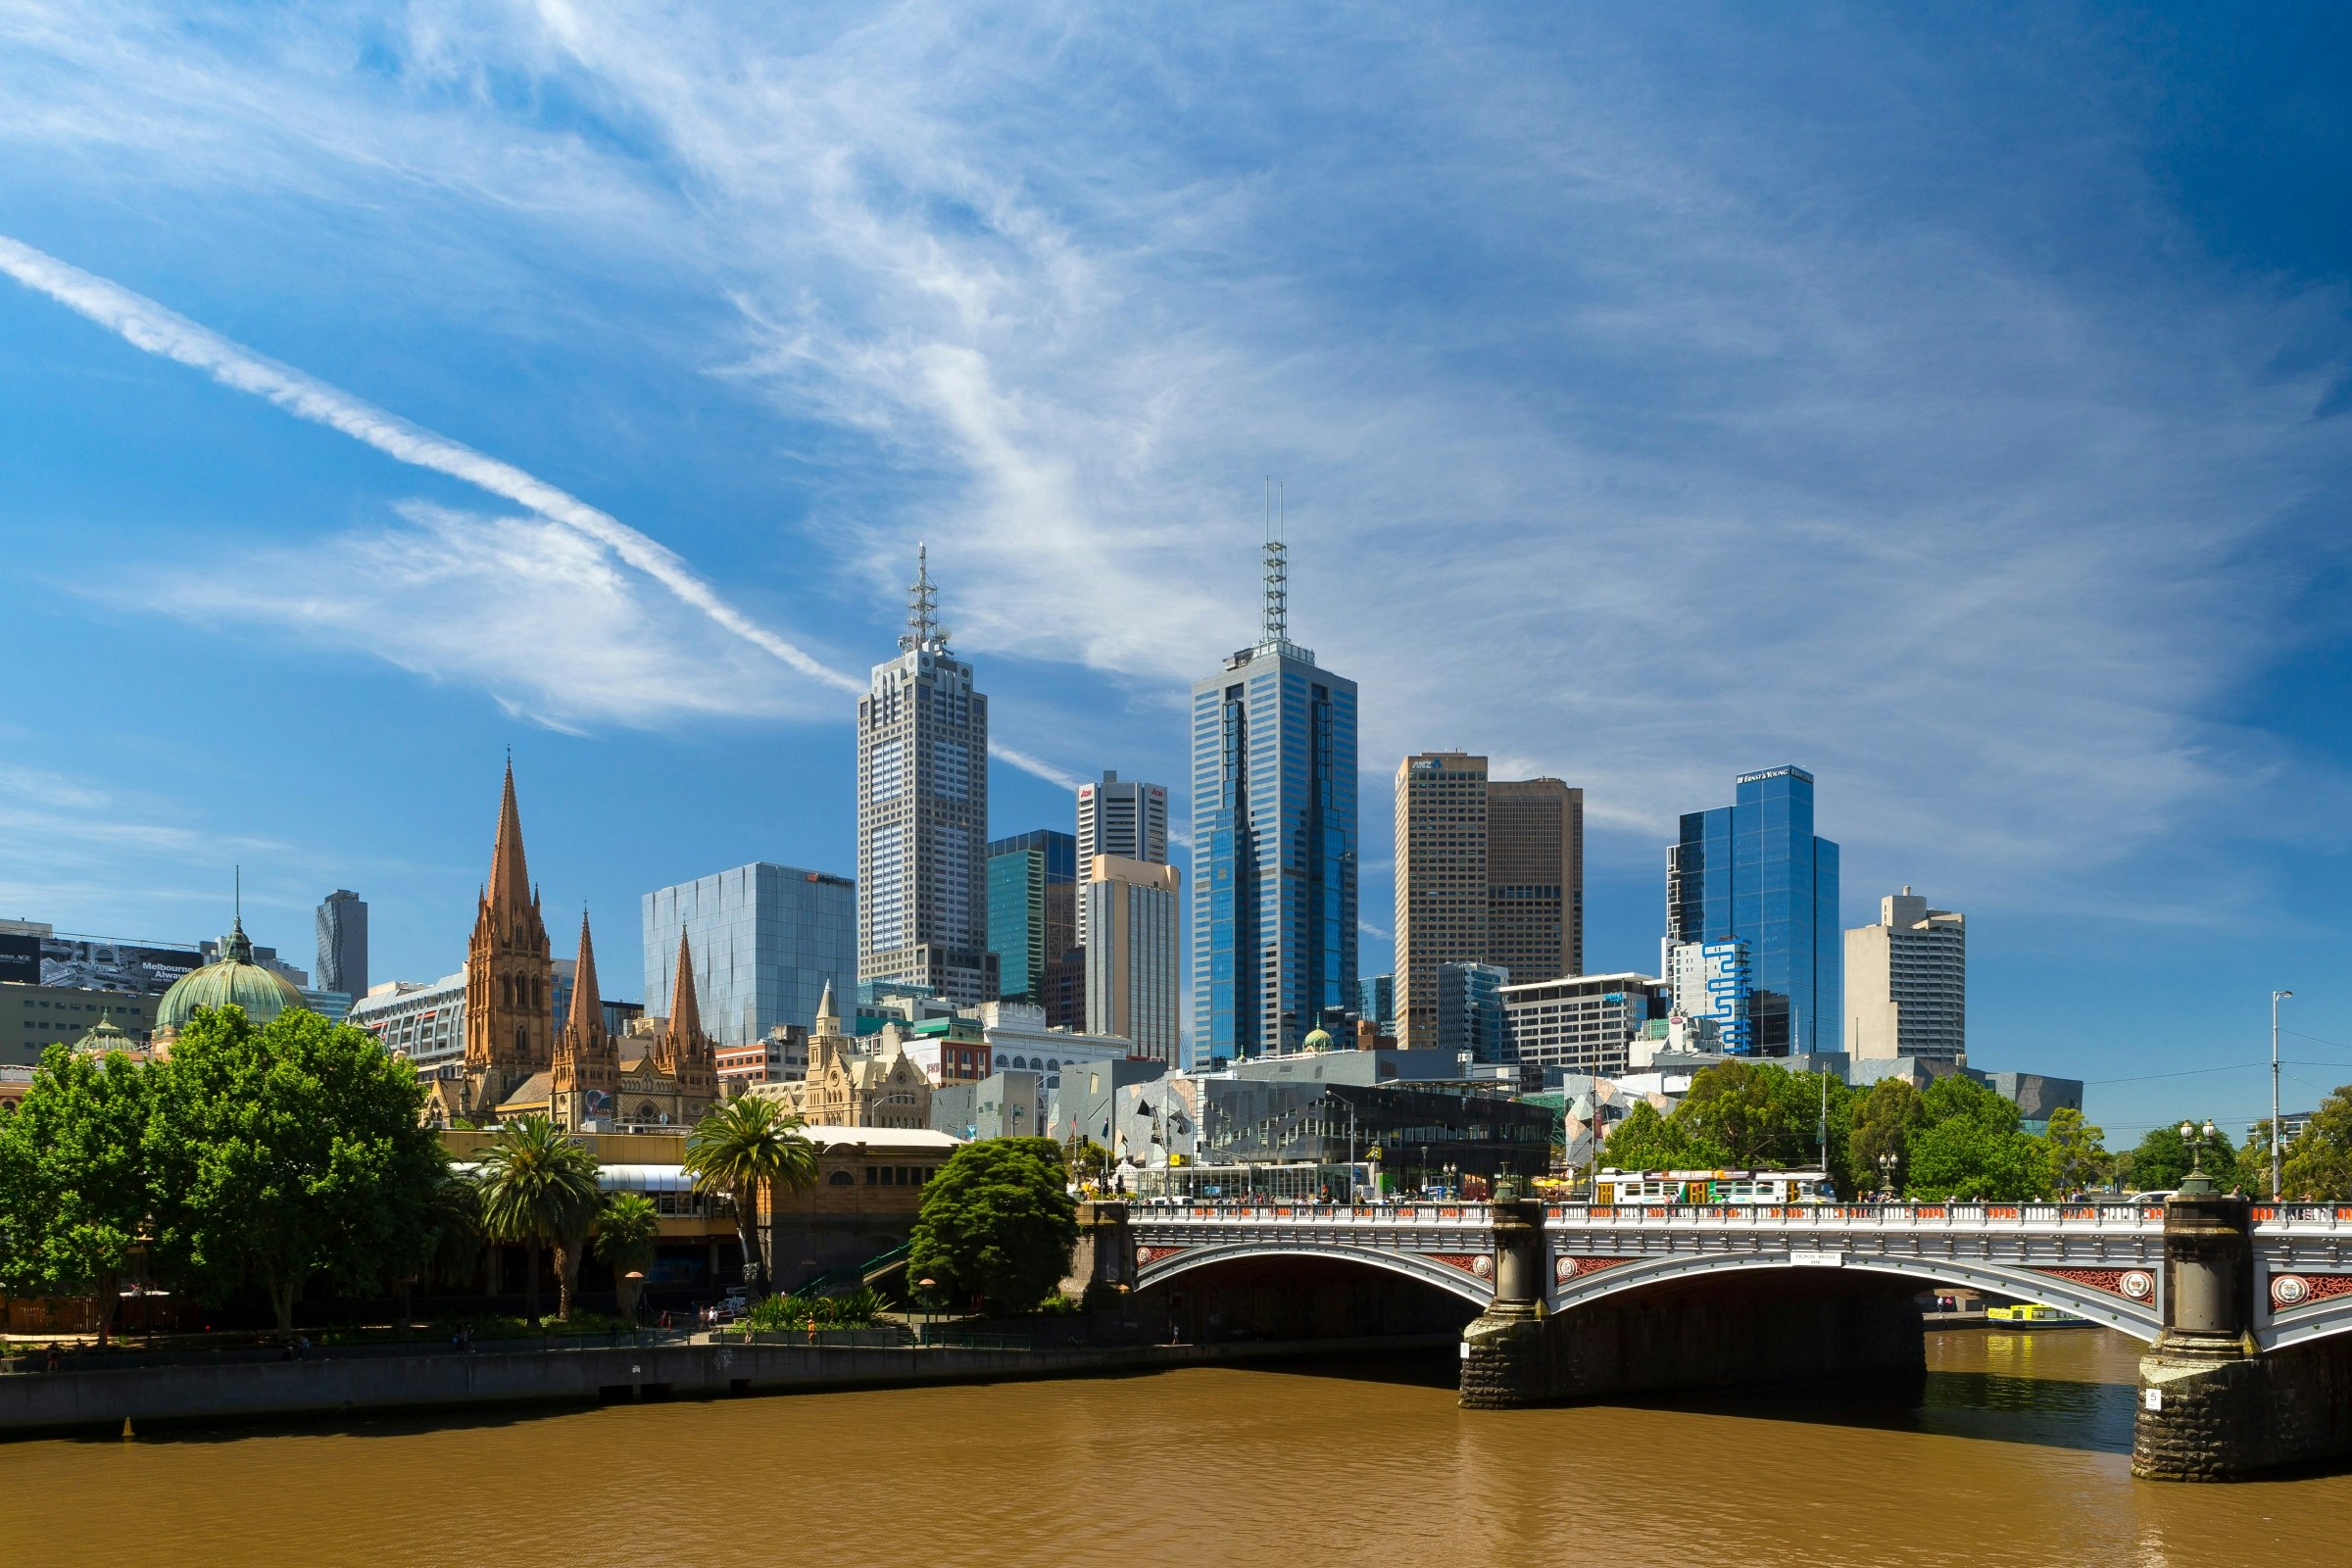 Melbourne cityscape from Southgate across the Yarra River with Princes Bridge, Flinders St Station, and Federation Square.